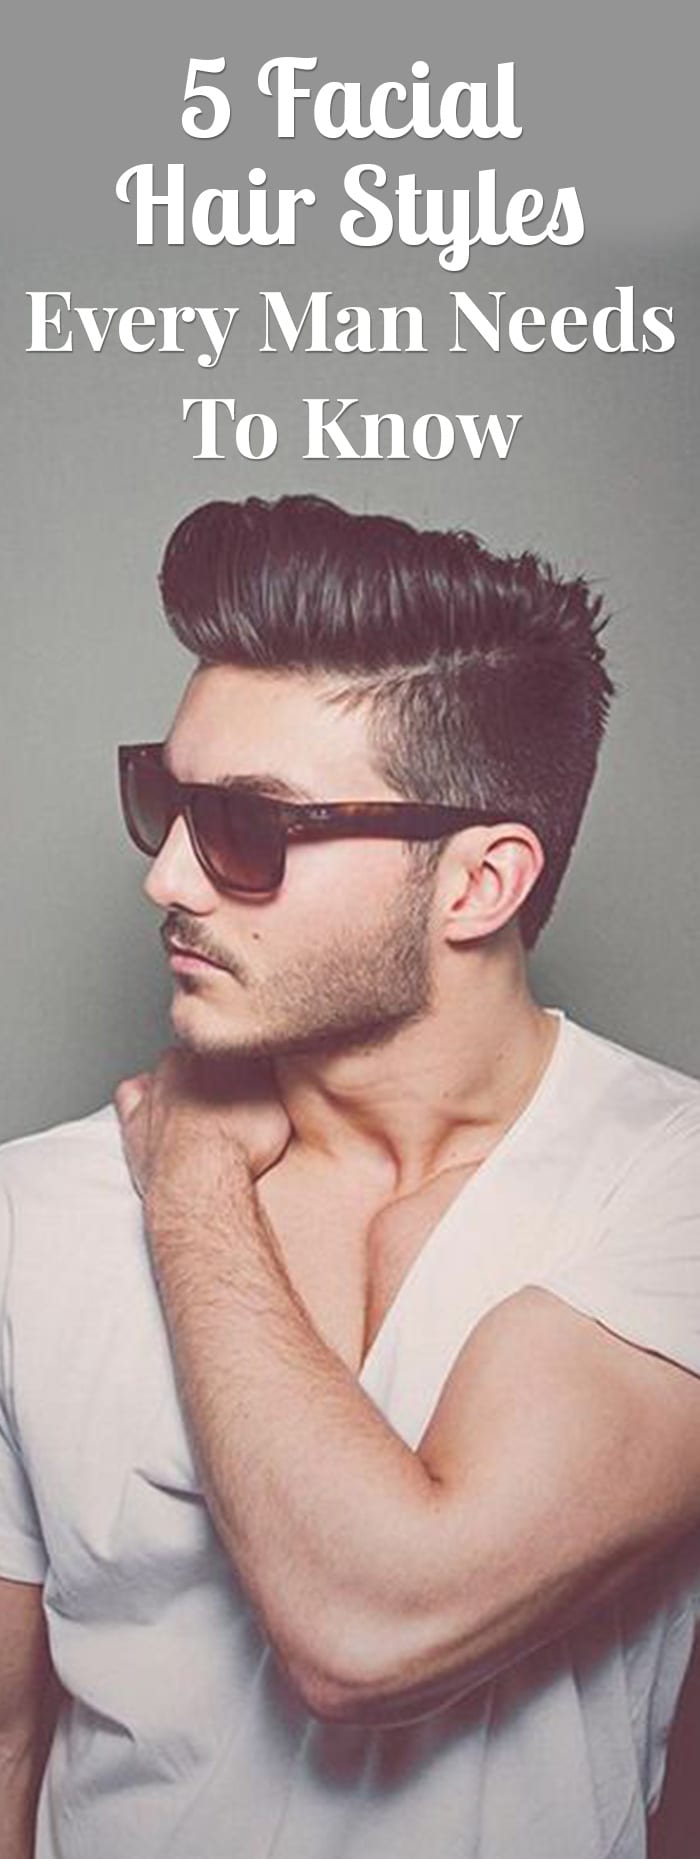 5 Facial Hair Styles Every Man Needs To Know